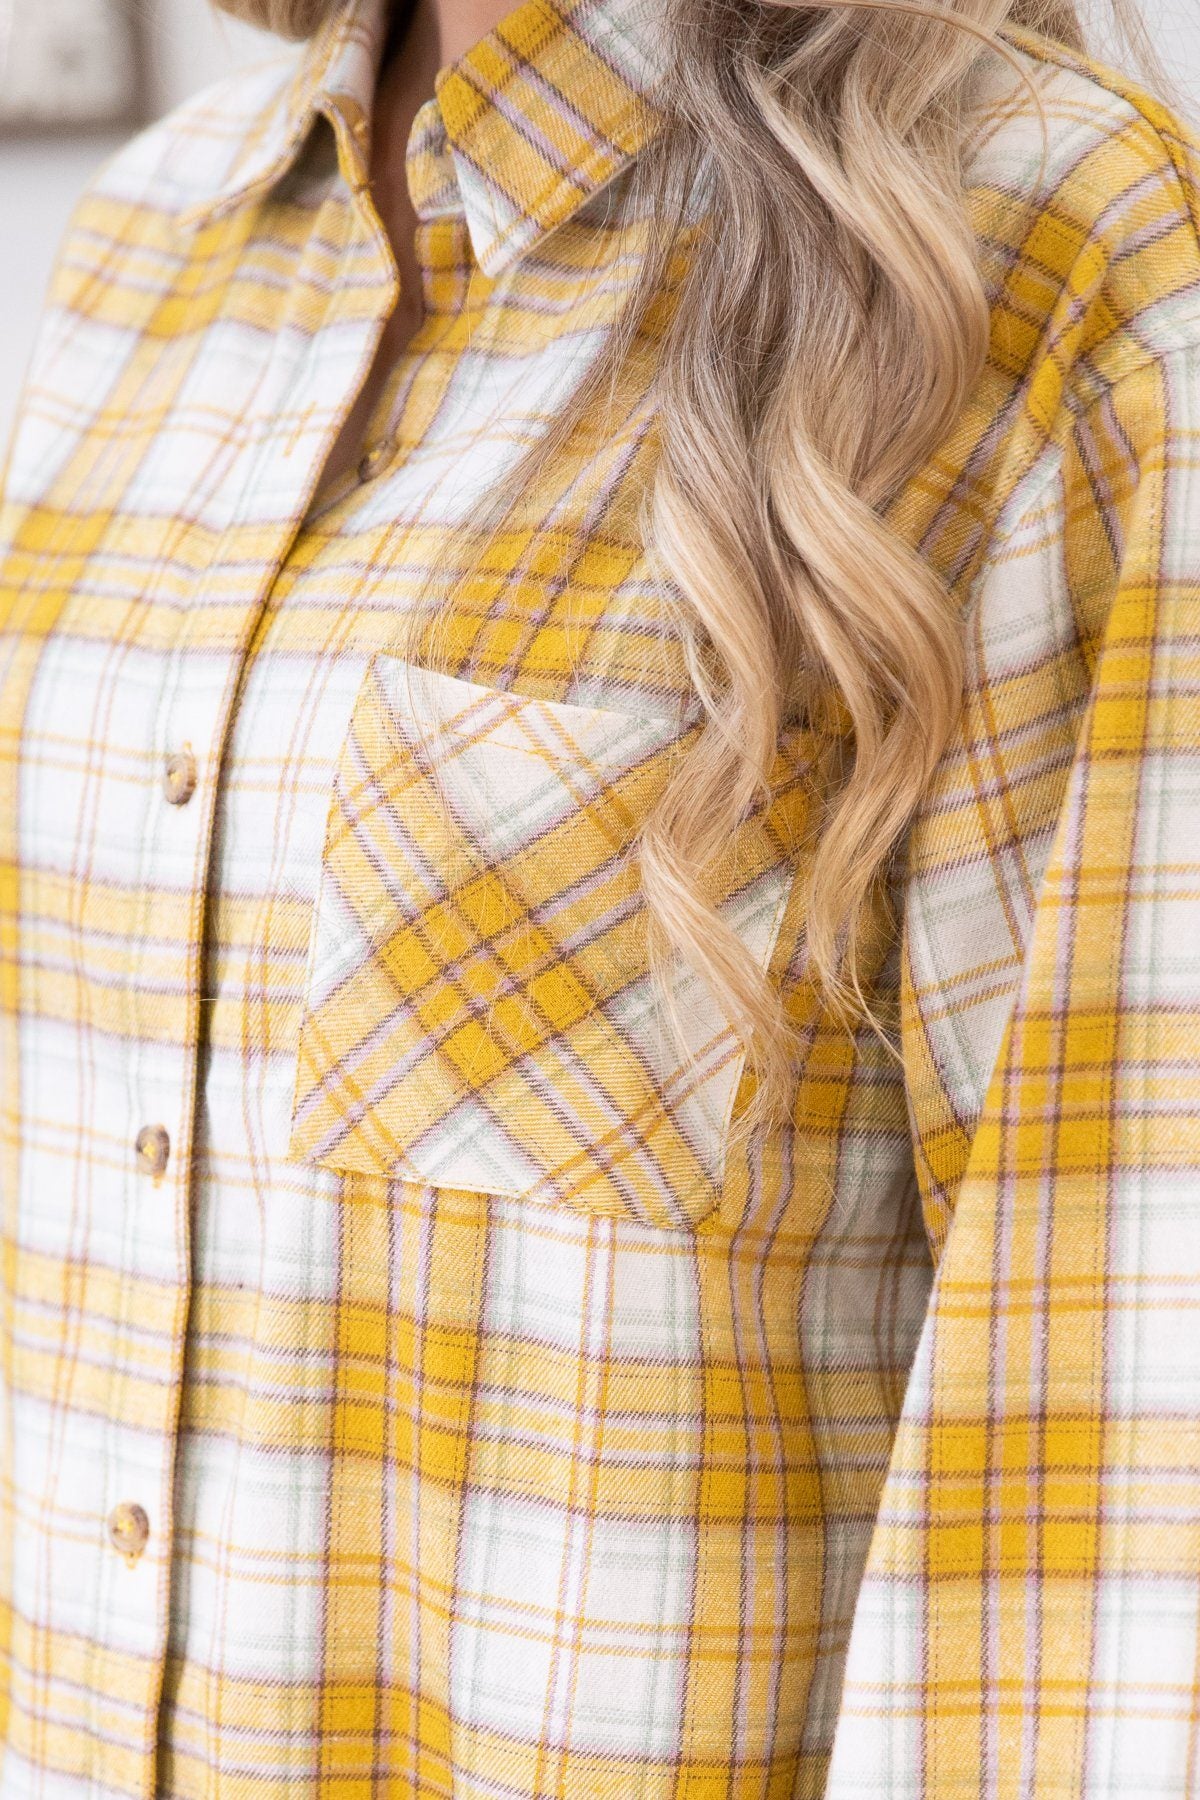 Cinnamon and Ivory Multicolor Plaid Top - Filly Flair